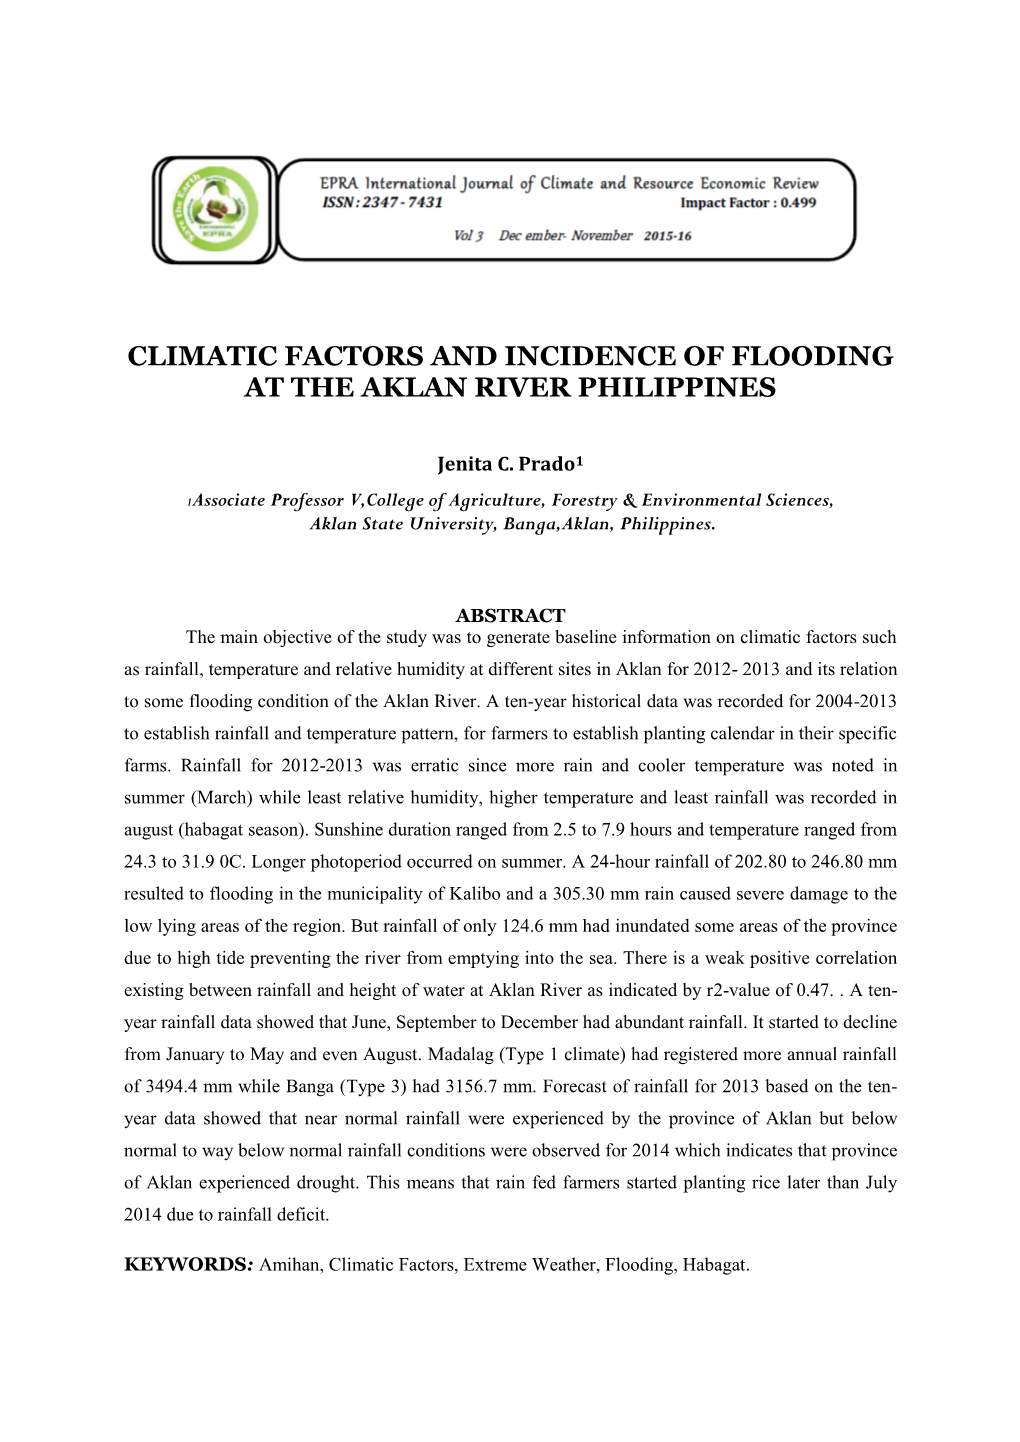 Climatic Factors and Incidence of Flooding at the Aklan River Philippines